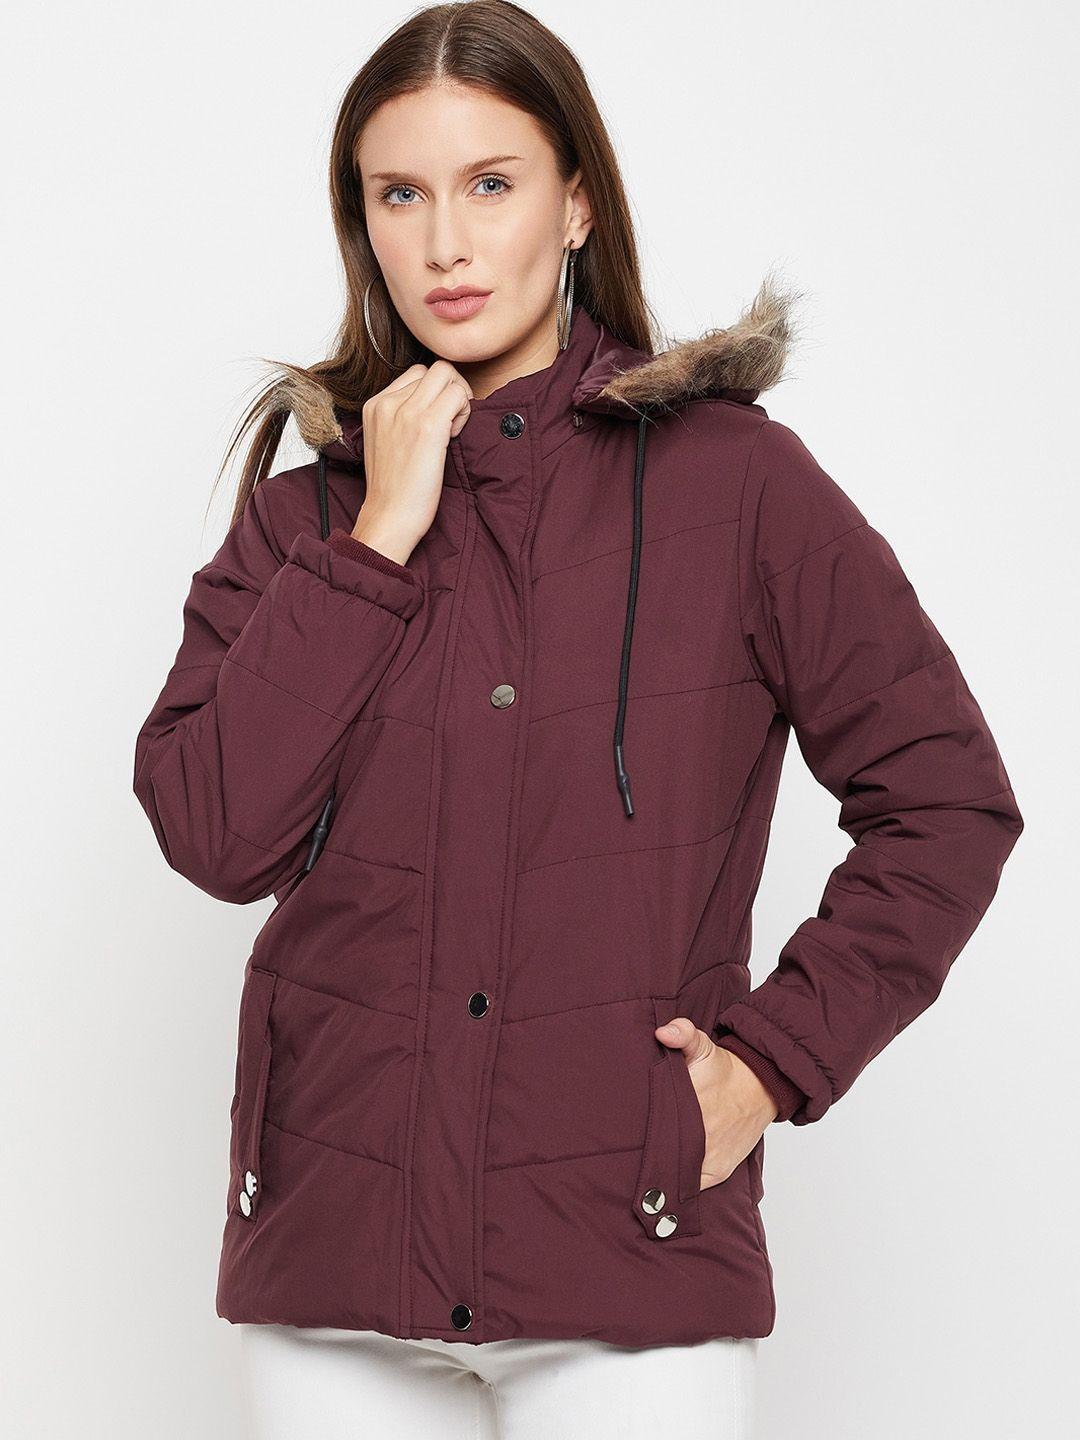 cantabil lightweight hooded quilted jacket